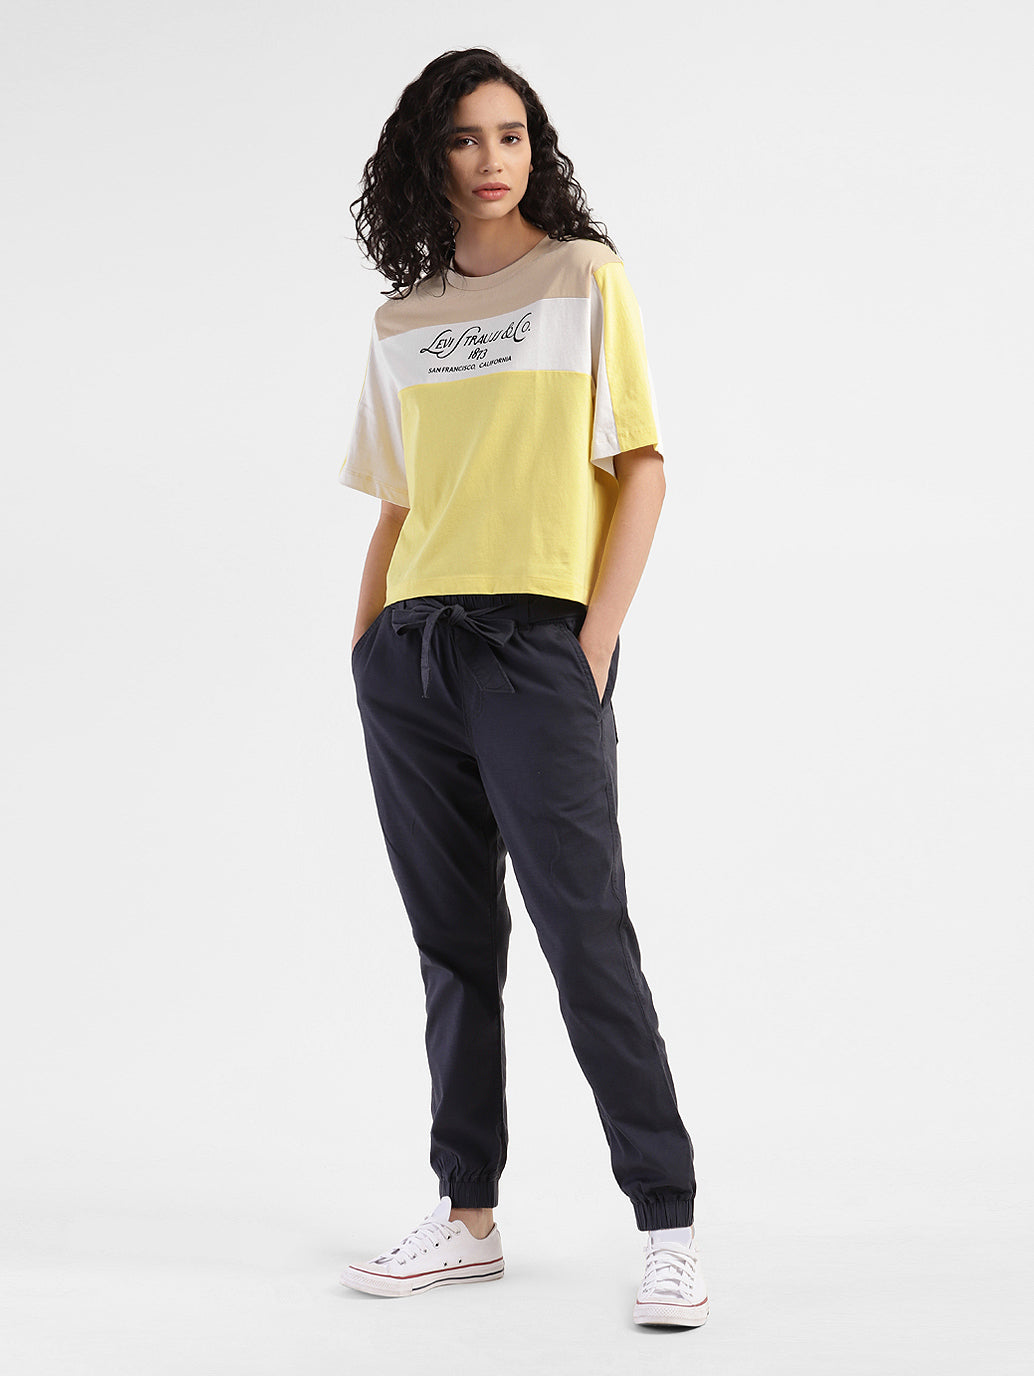 Women's Colorblock Relaxed Fit T-shirt